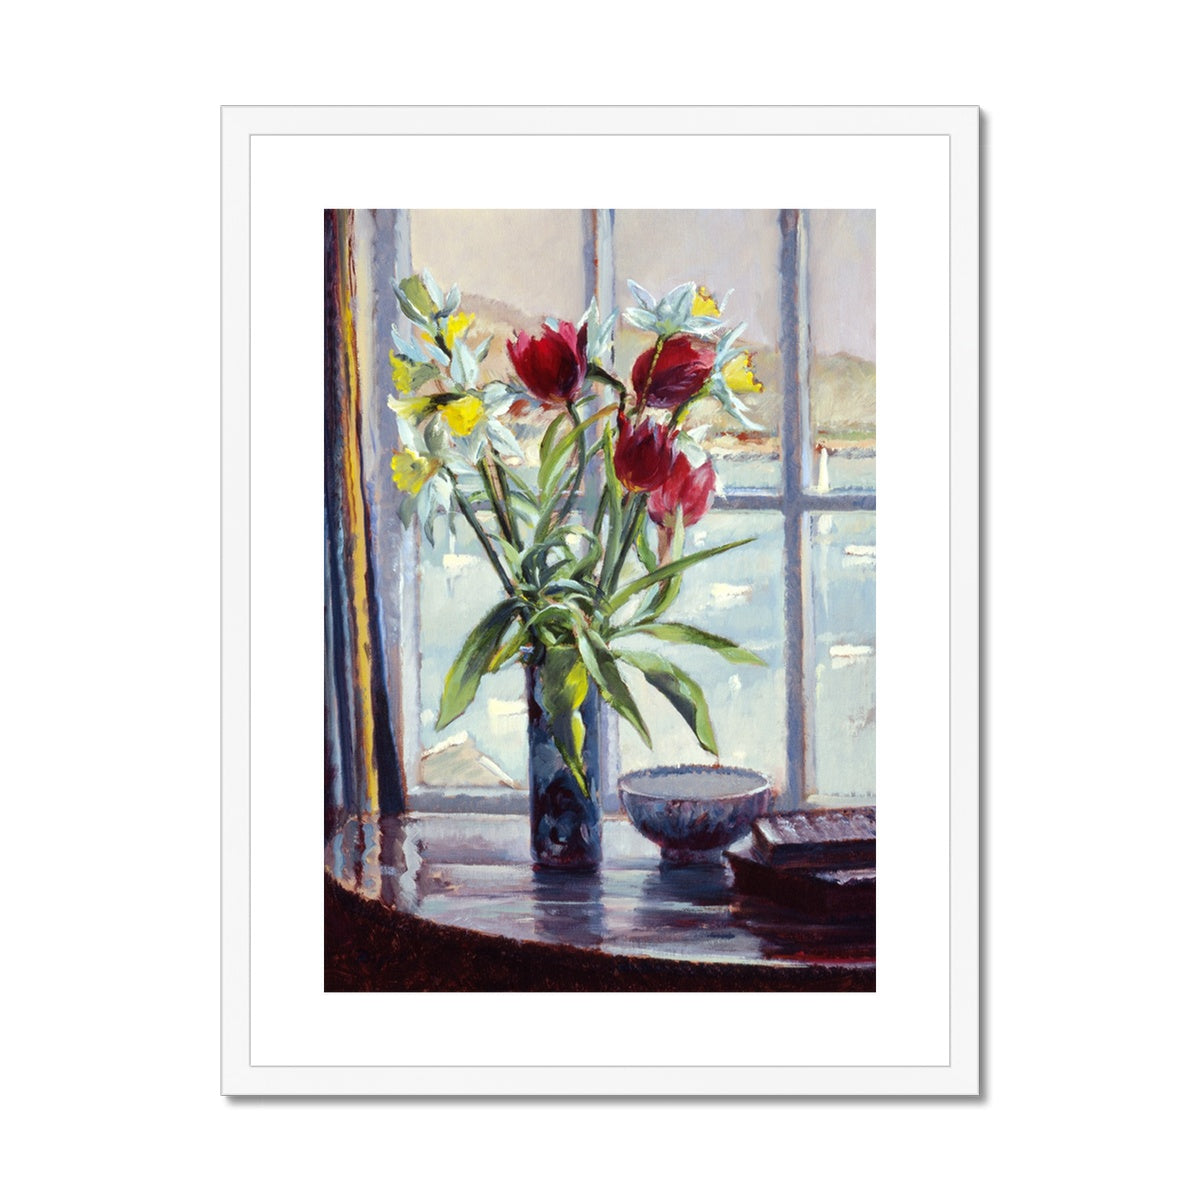 Ted Dyer Framed Open Edition Cornish Fine Art Print. 'Daffodils and Tulips in a Vase, Still Life'. Cornwall Art Gallery